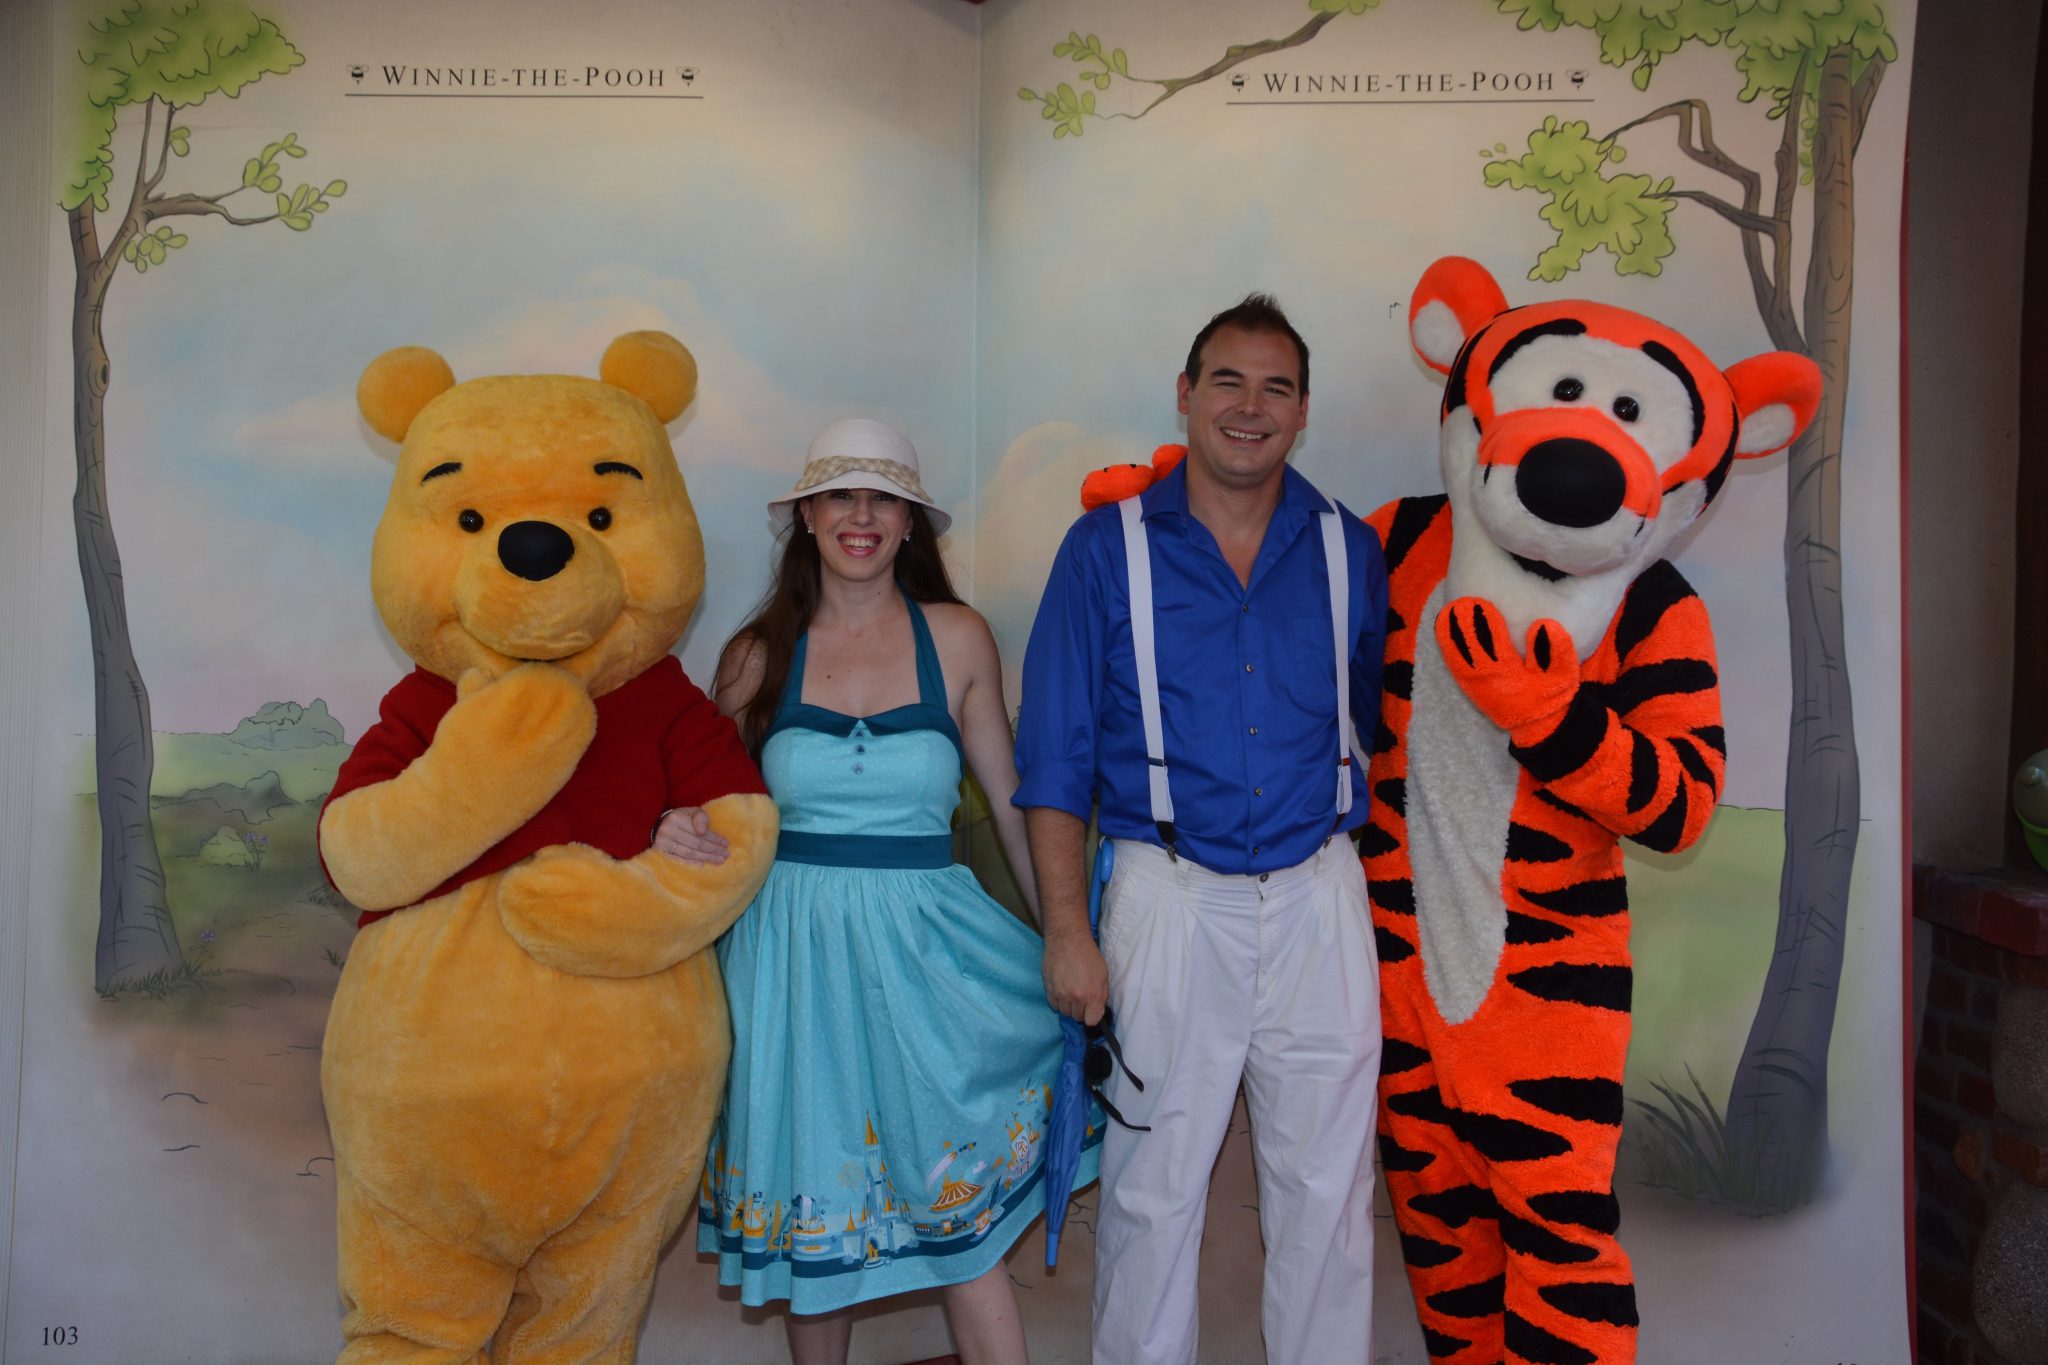 Chelsea and Jay with Pooh and Tigger on Dapper Day.